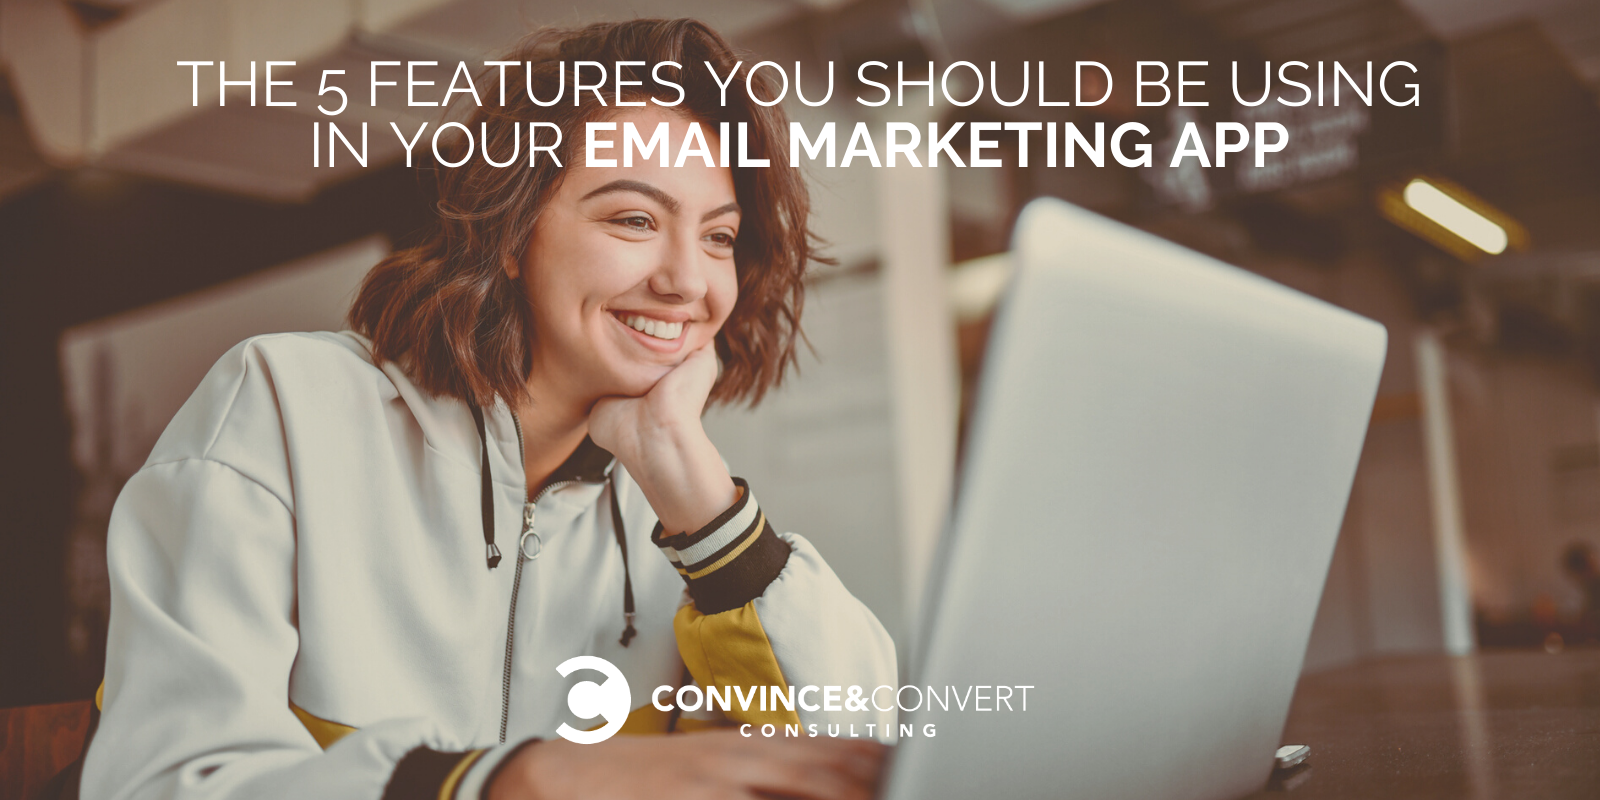 The 5 Features You Should Be Using In Your Email Marketing App